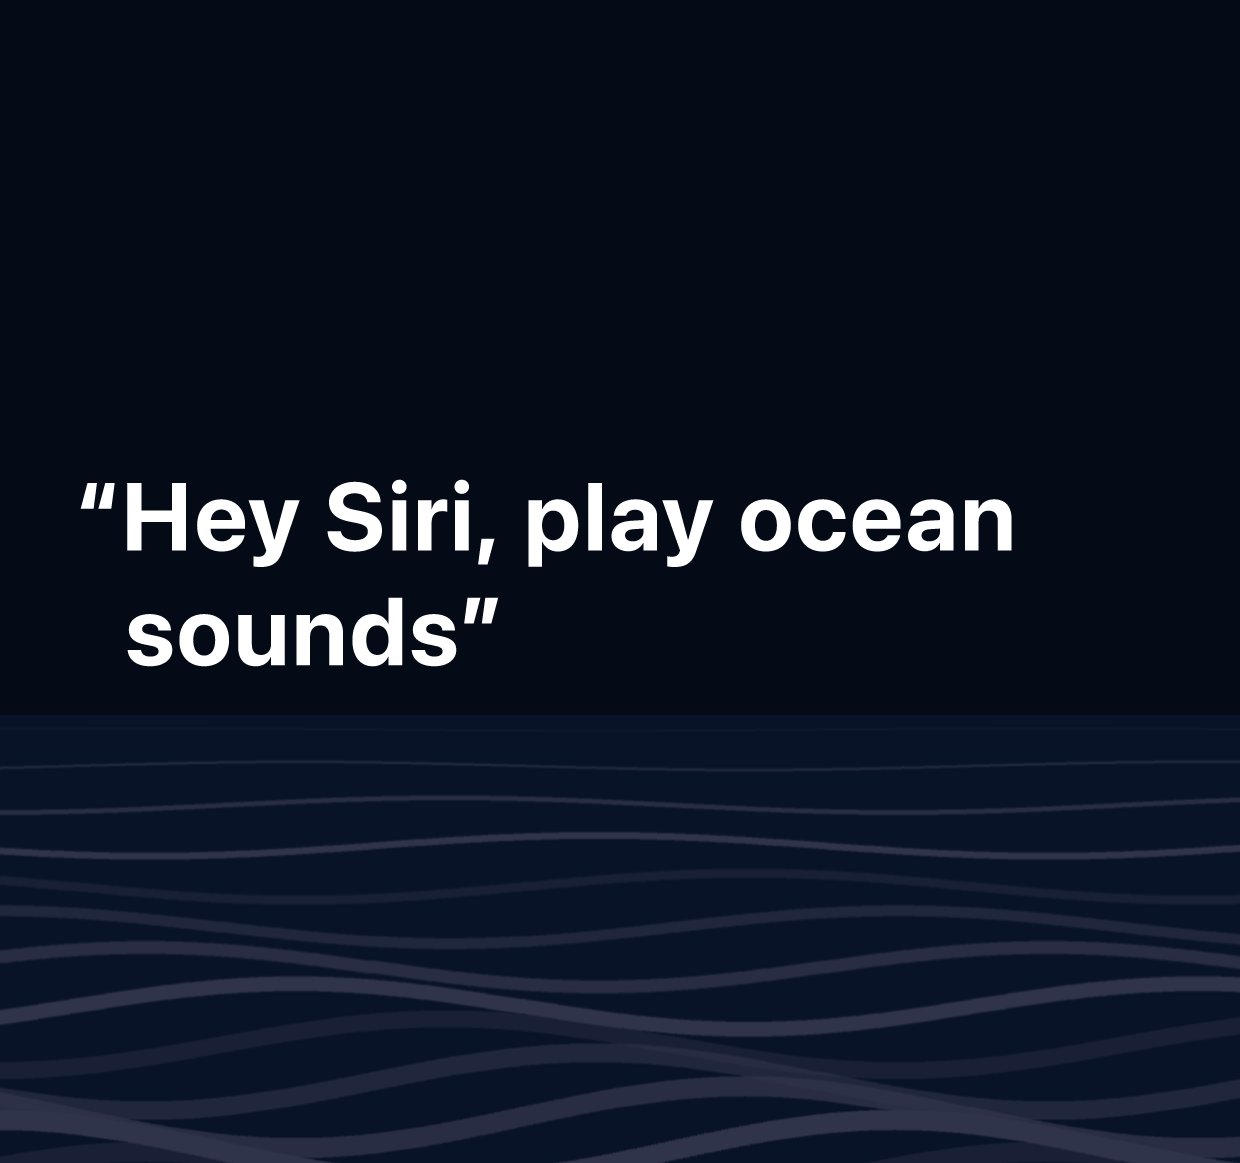 An illustration of the words “Hey Siri, play ocean sounds.”